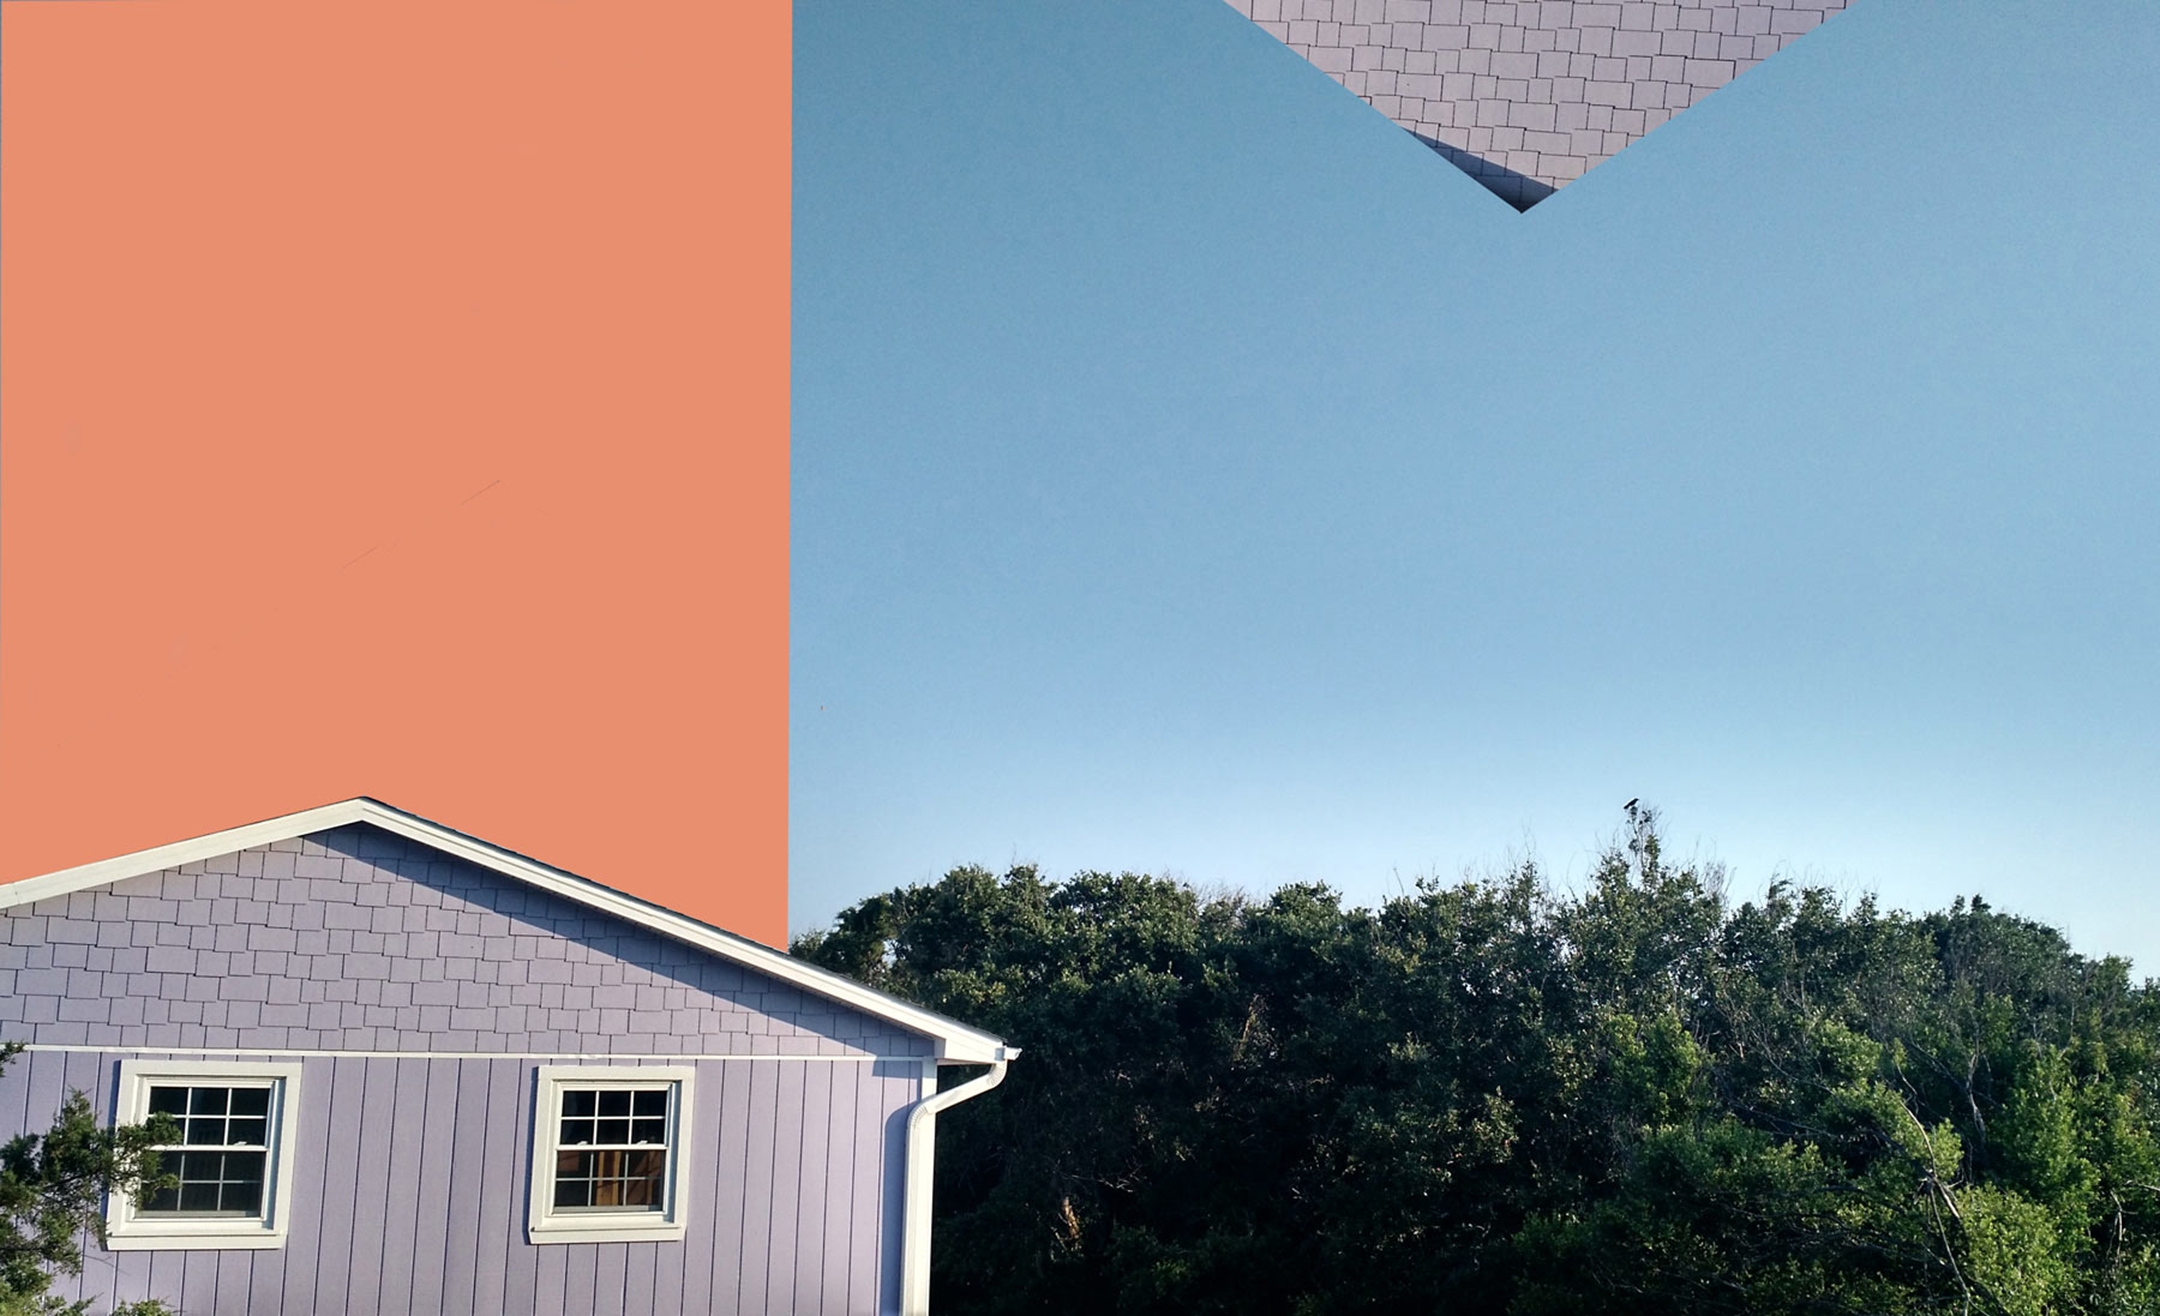 Photo illustration of a house on the left against a peach background and a photo of the tops of trees on the right with the tip of a roof poking down from the top of the image